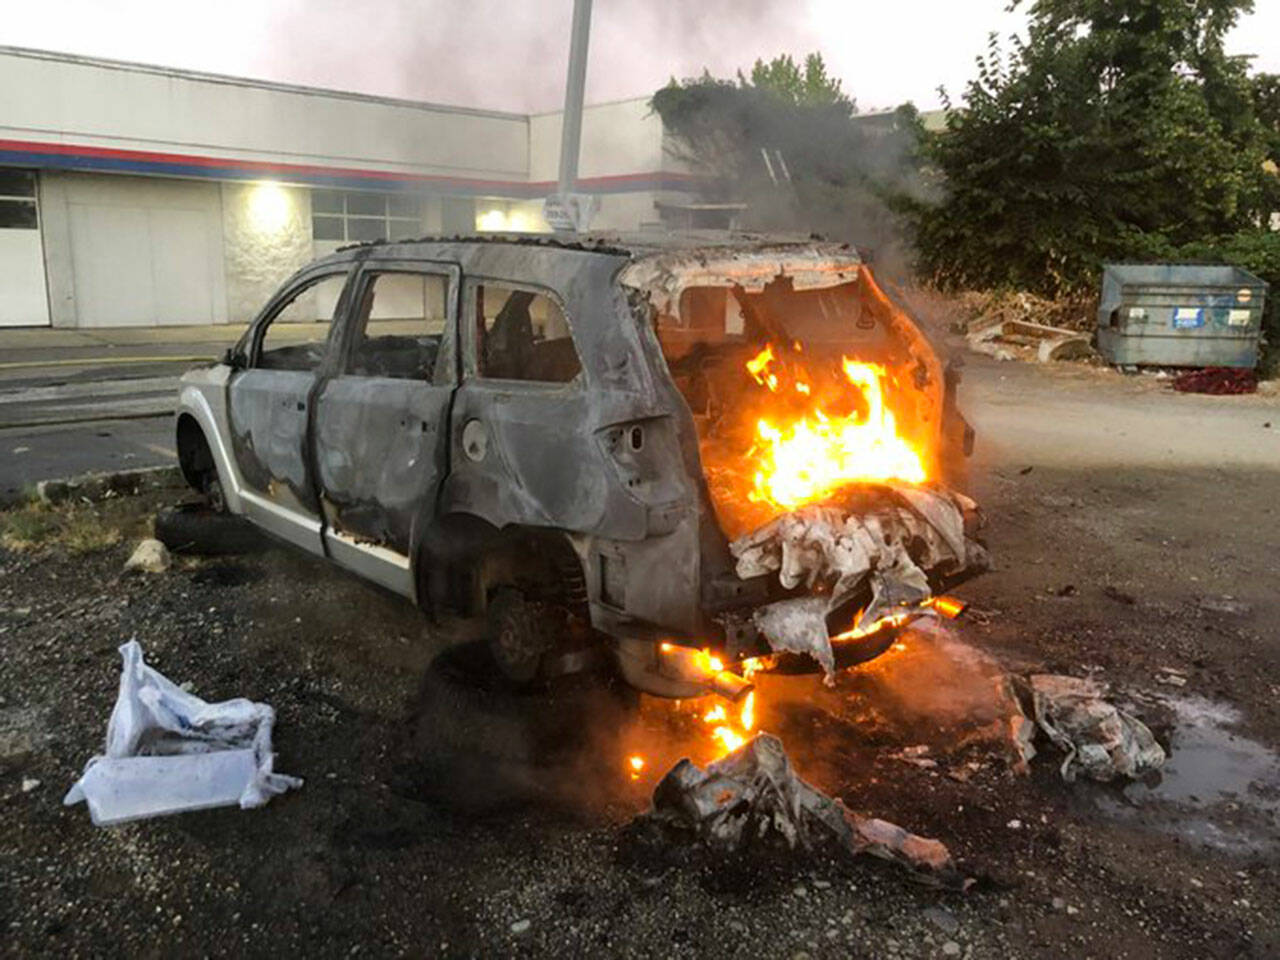 Puget Sound Fire responded to four fires within an hour Aug. 8 on Kent’s East Hill, including this vehicle fire. COURTESY PHOTO, Puget Sound Fire